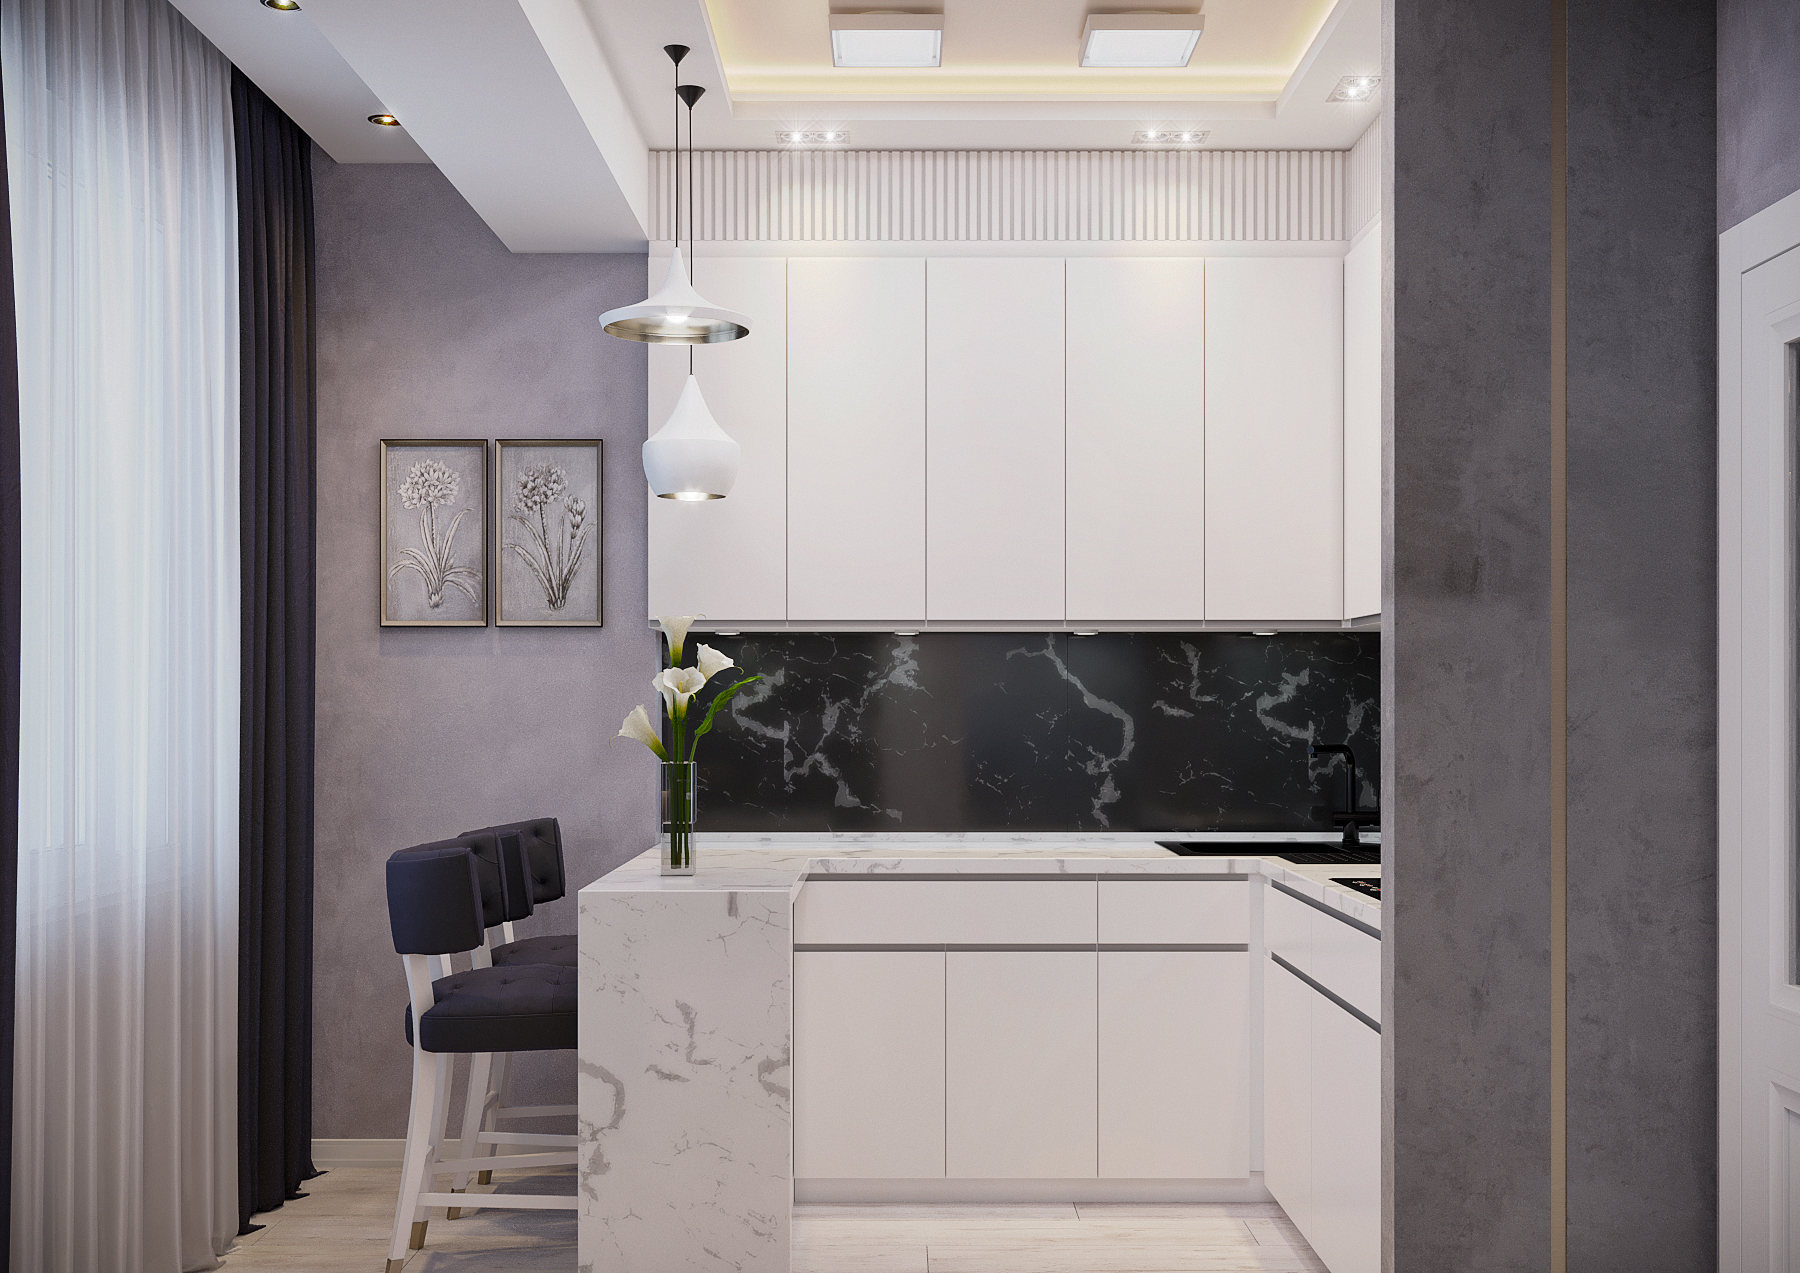 Kitchen-dining room in 3d max corona render image